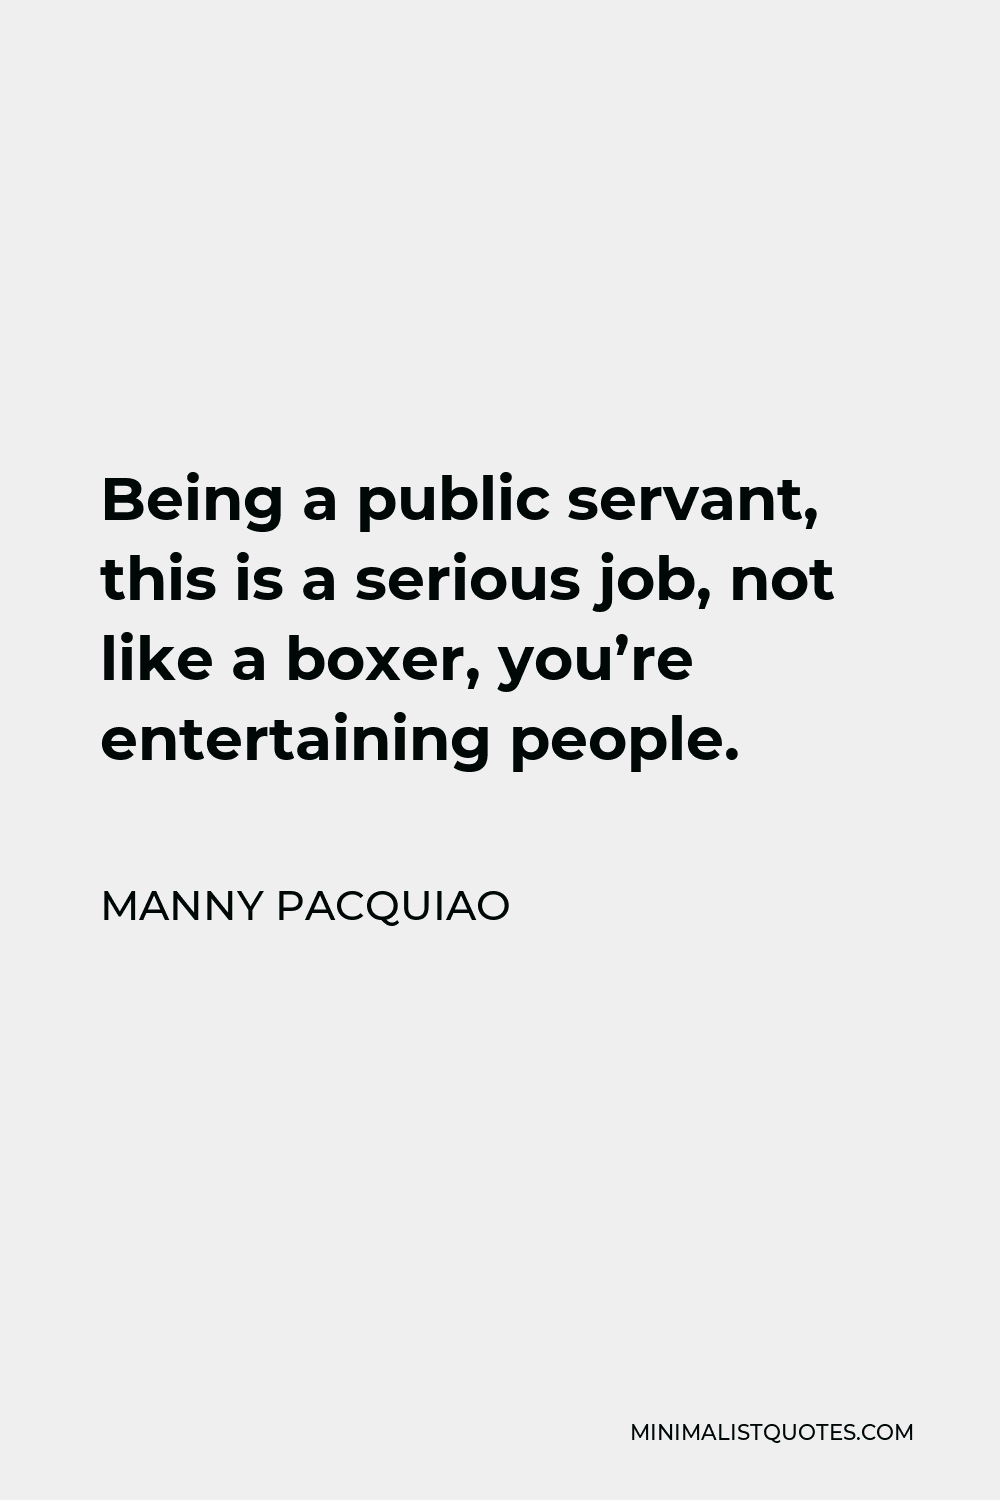 Manny Pacquiao Quote - Being a public servant, this is a serious job, not like a boxer, you’re entertaining people.